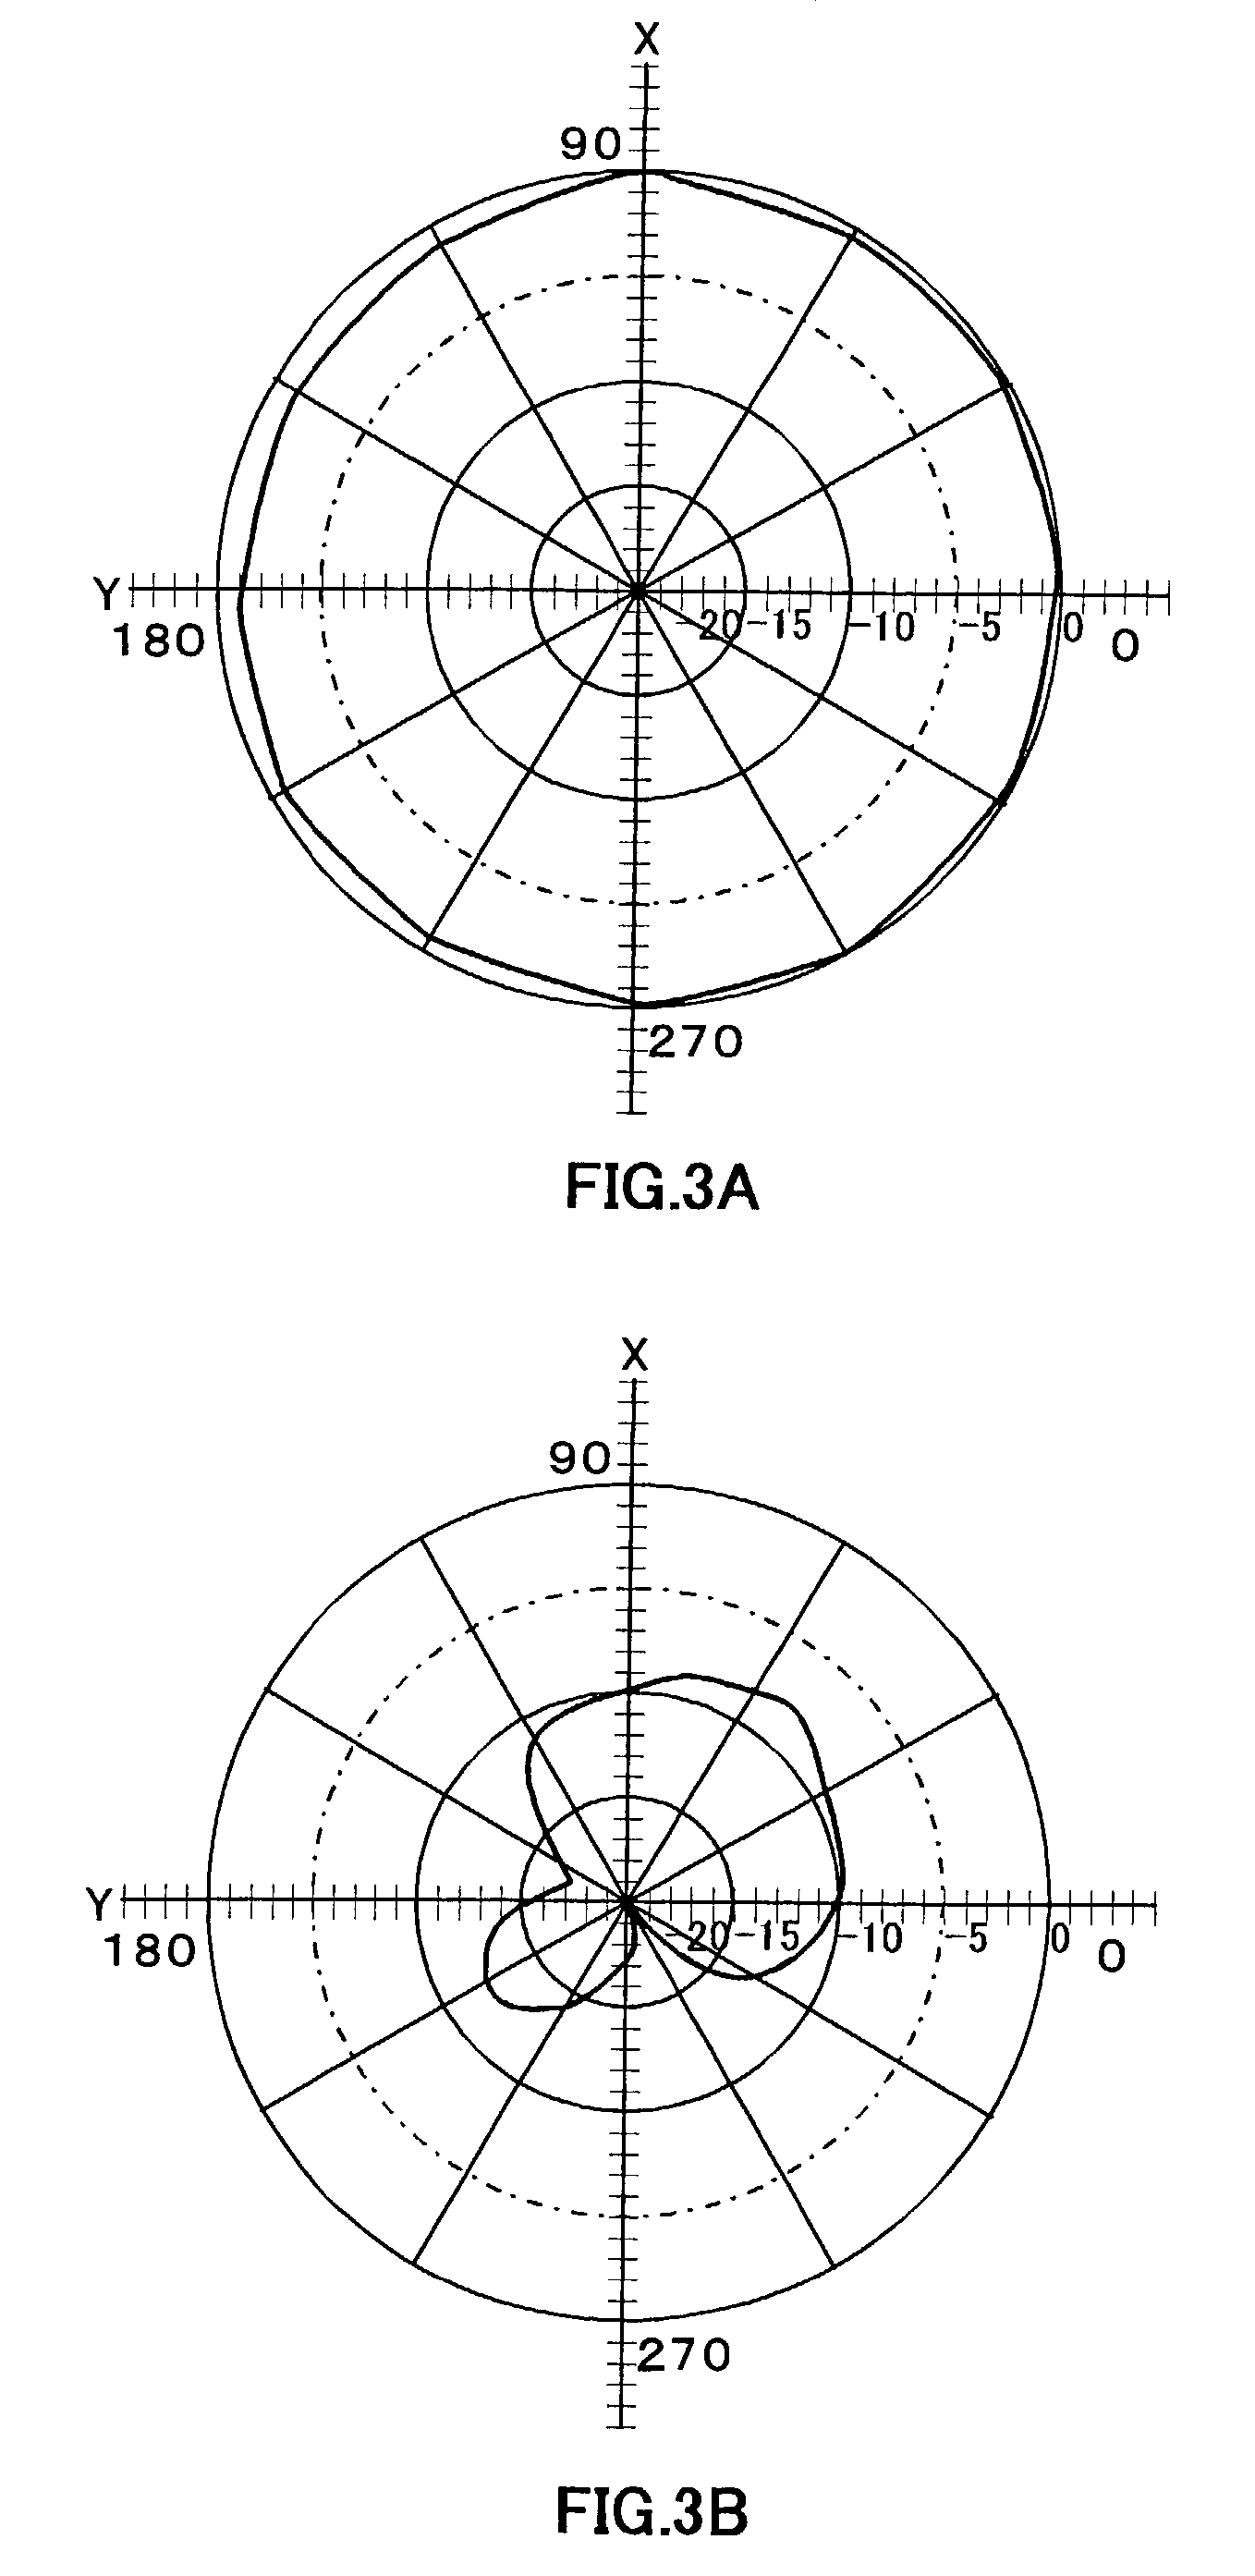 Built-in antenna for radio communication terminal